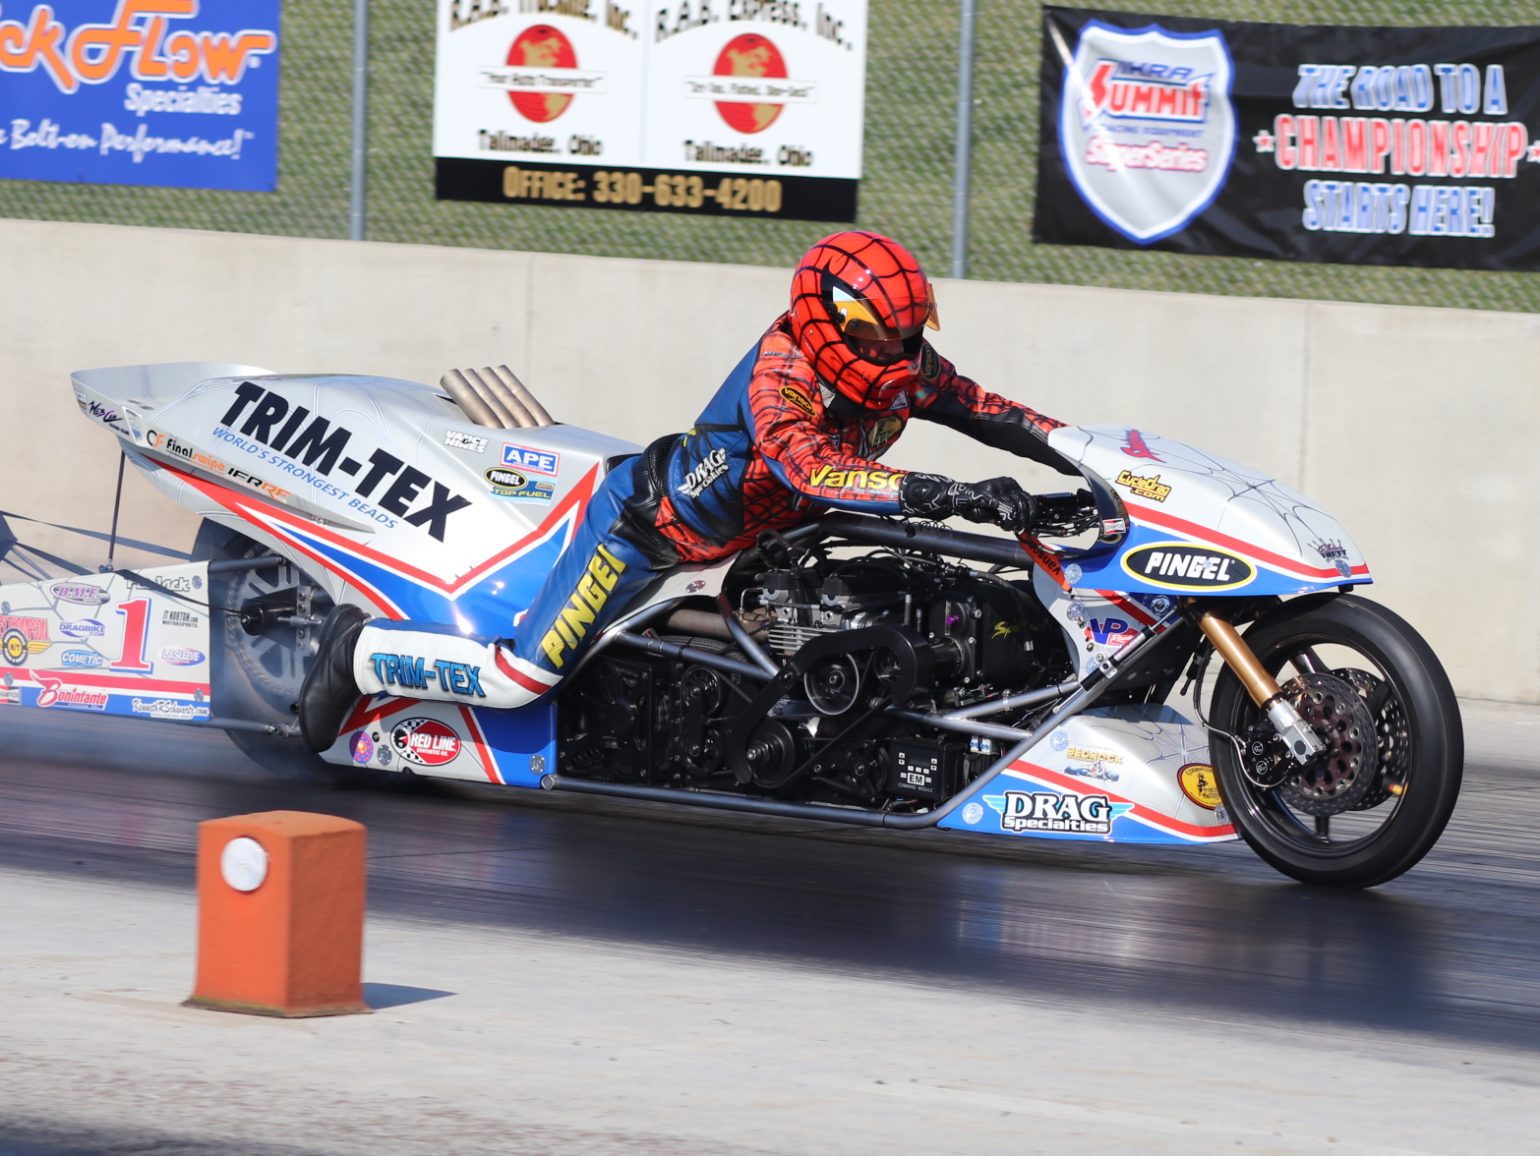 Larry “Spiderman” McBride Scores Man Cup Victory at Dragway 42 – Drag ...